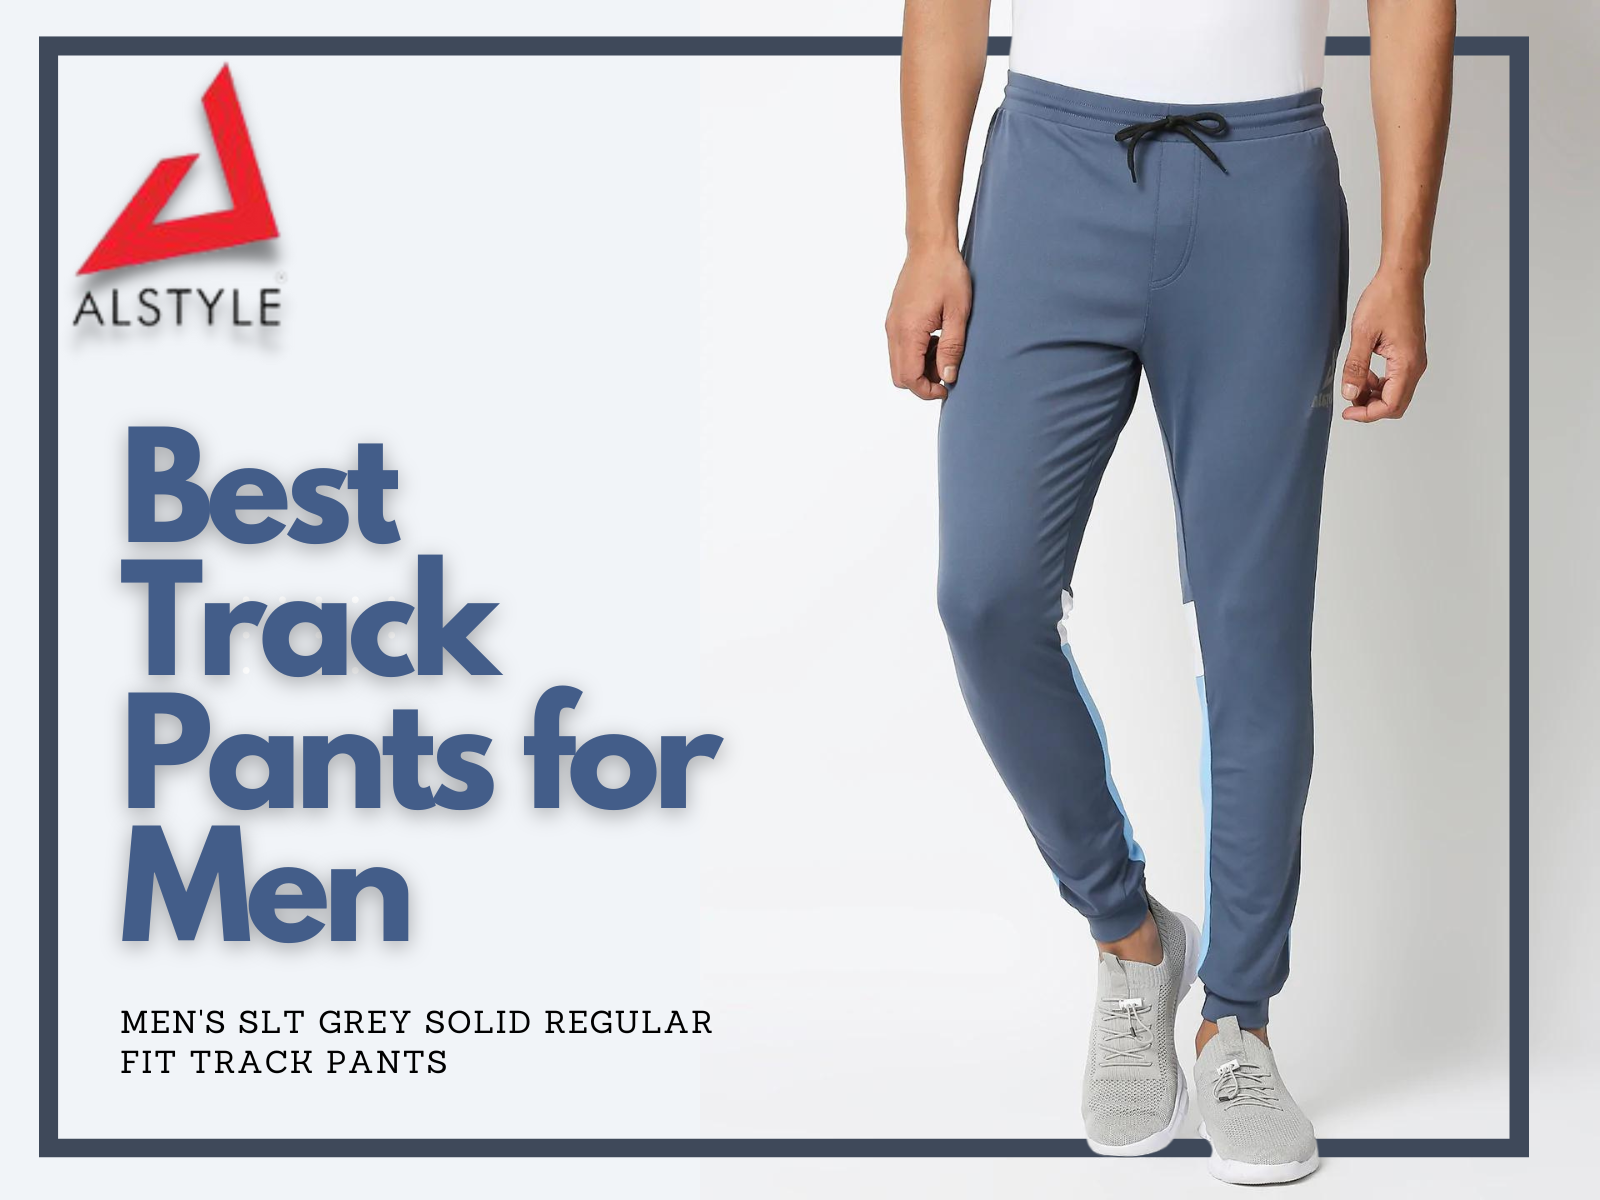 Best Track Pants for Men by Vicky on Dribbble